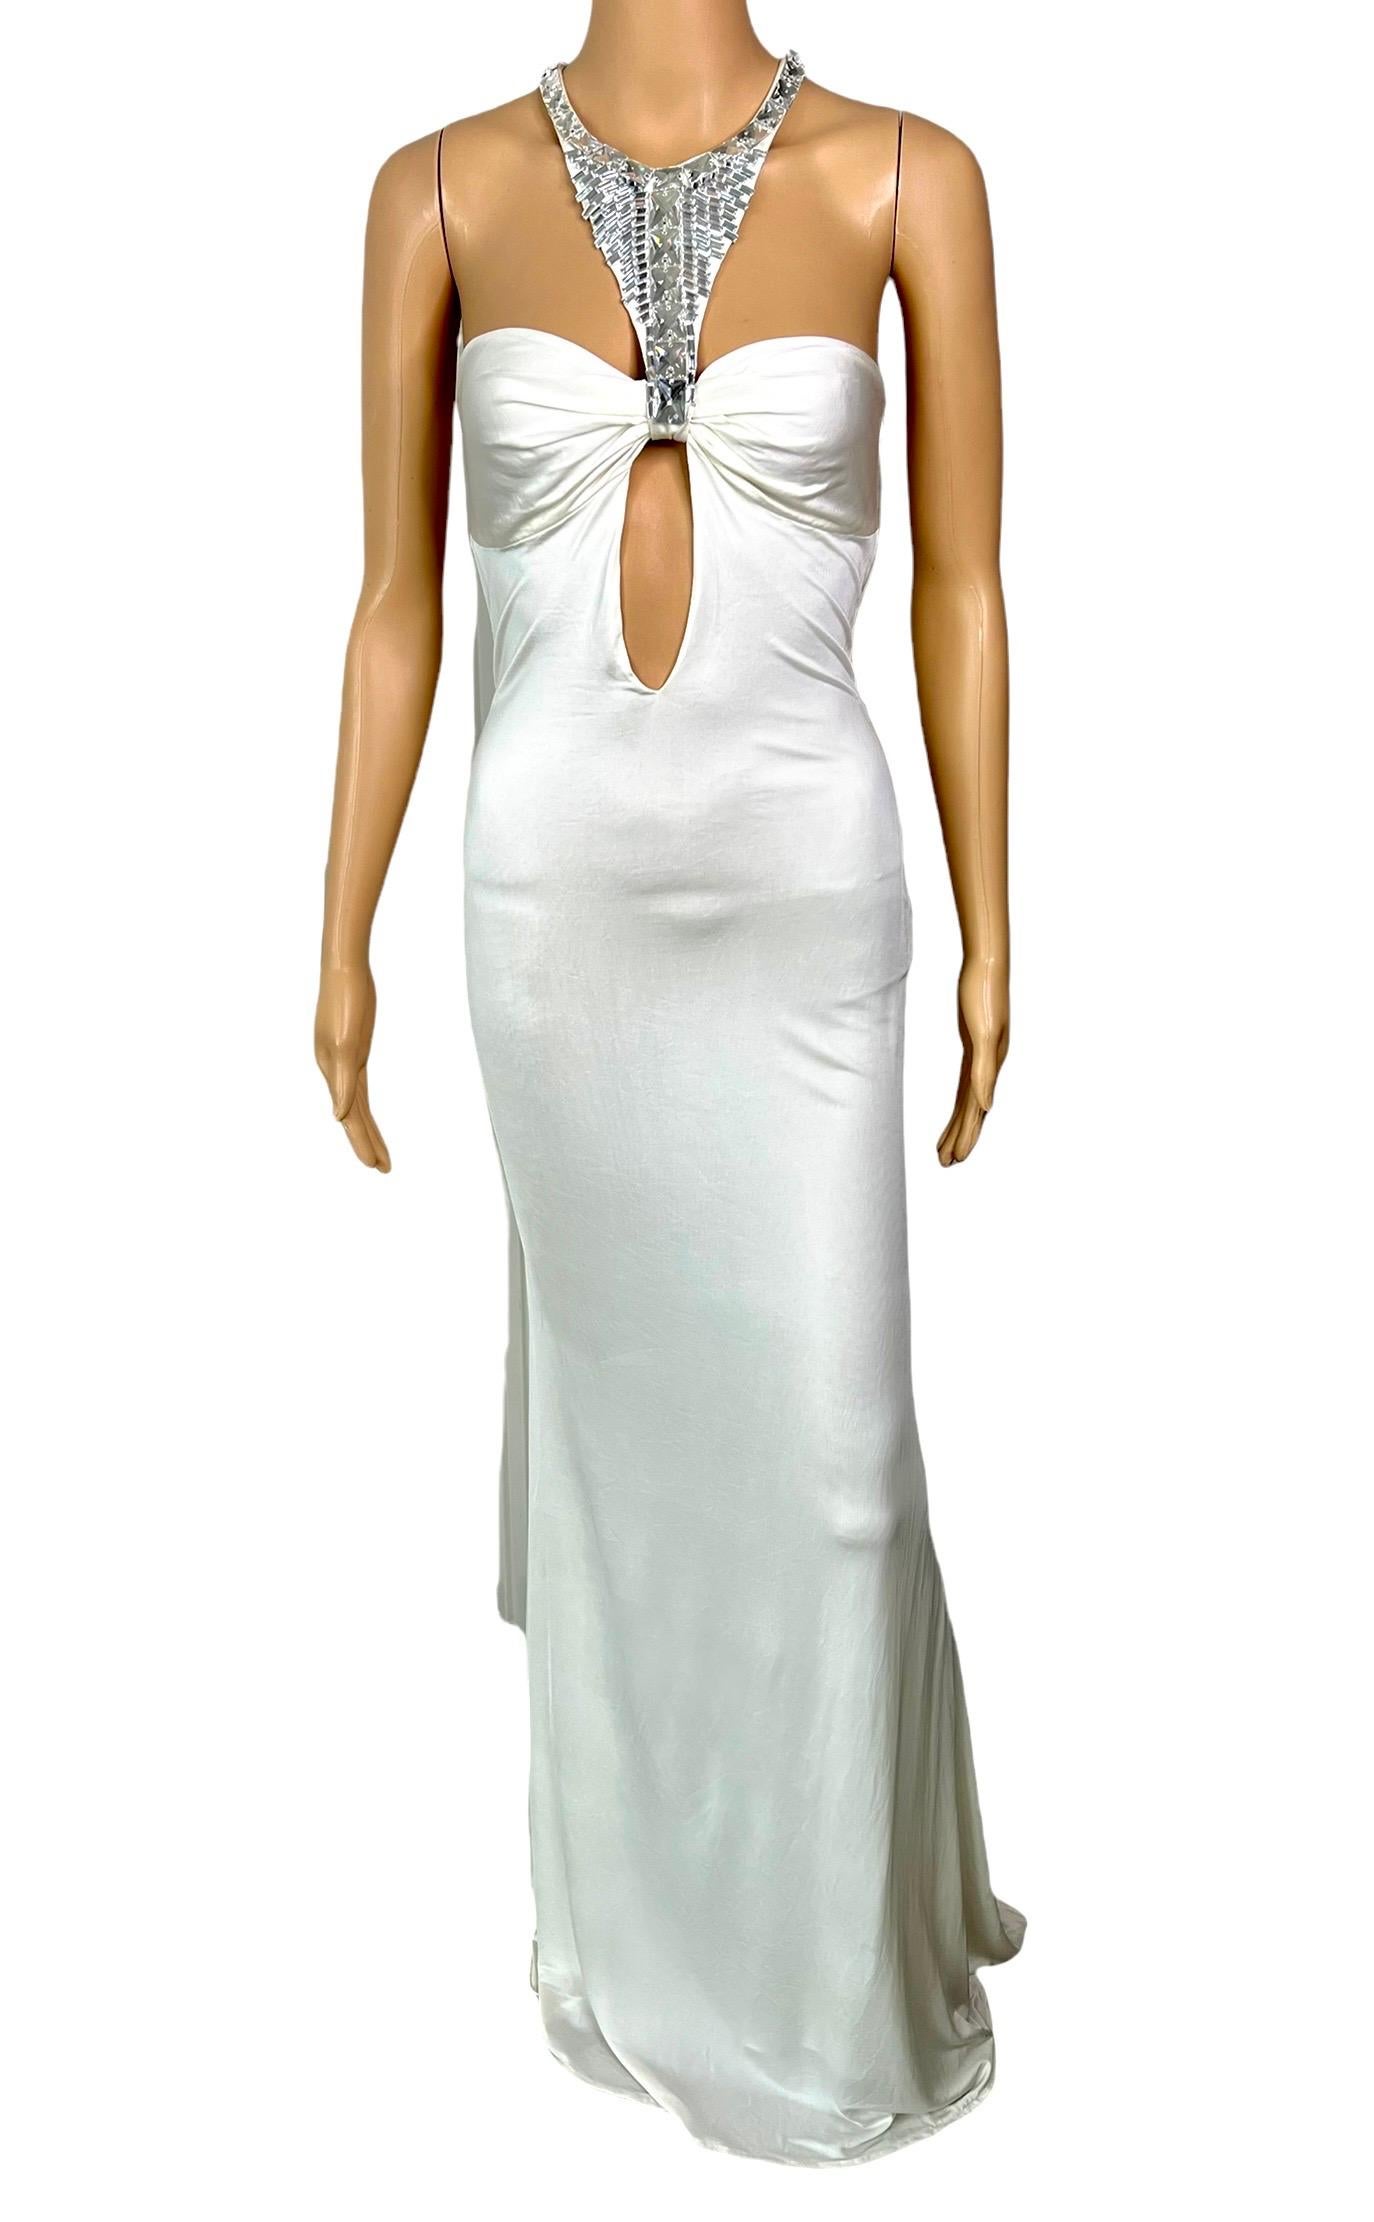 Women's Tom Ford for Gucci F/W 2004 Embellished Plunging Cutout Ivory Evening Dress Gown For Sale